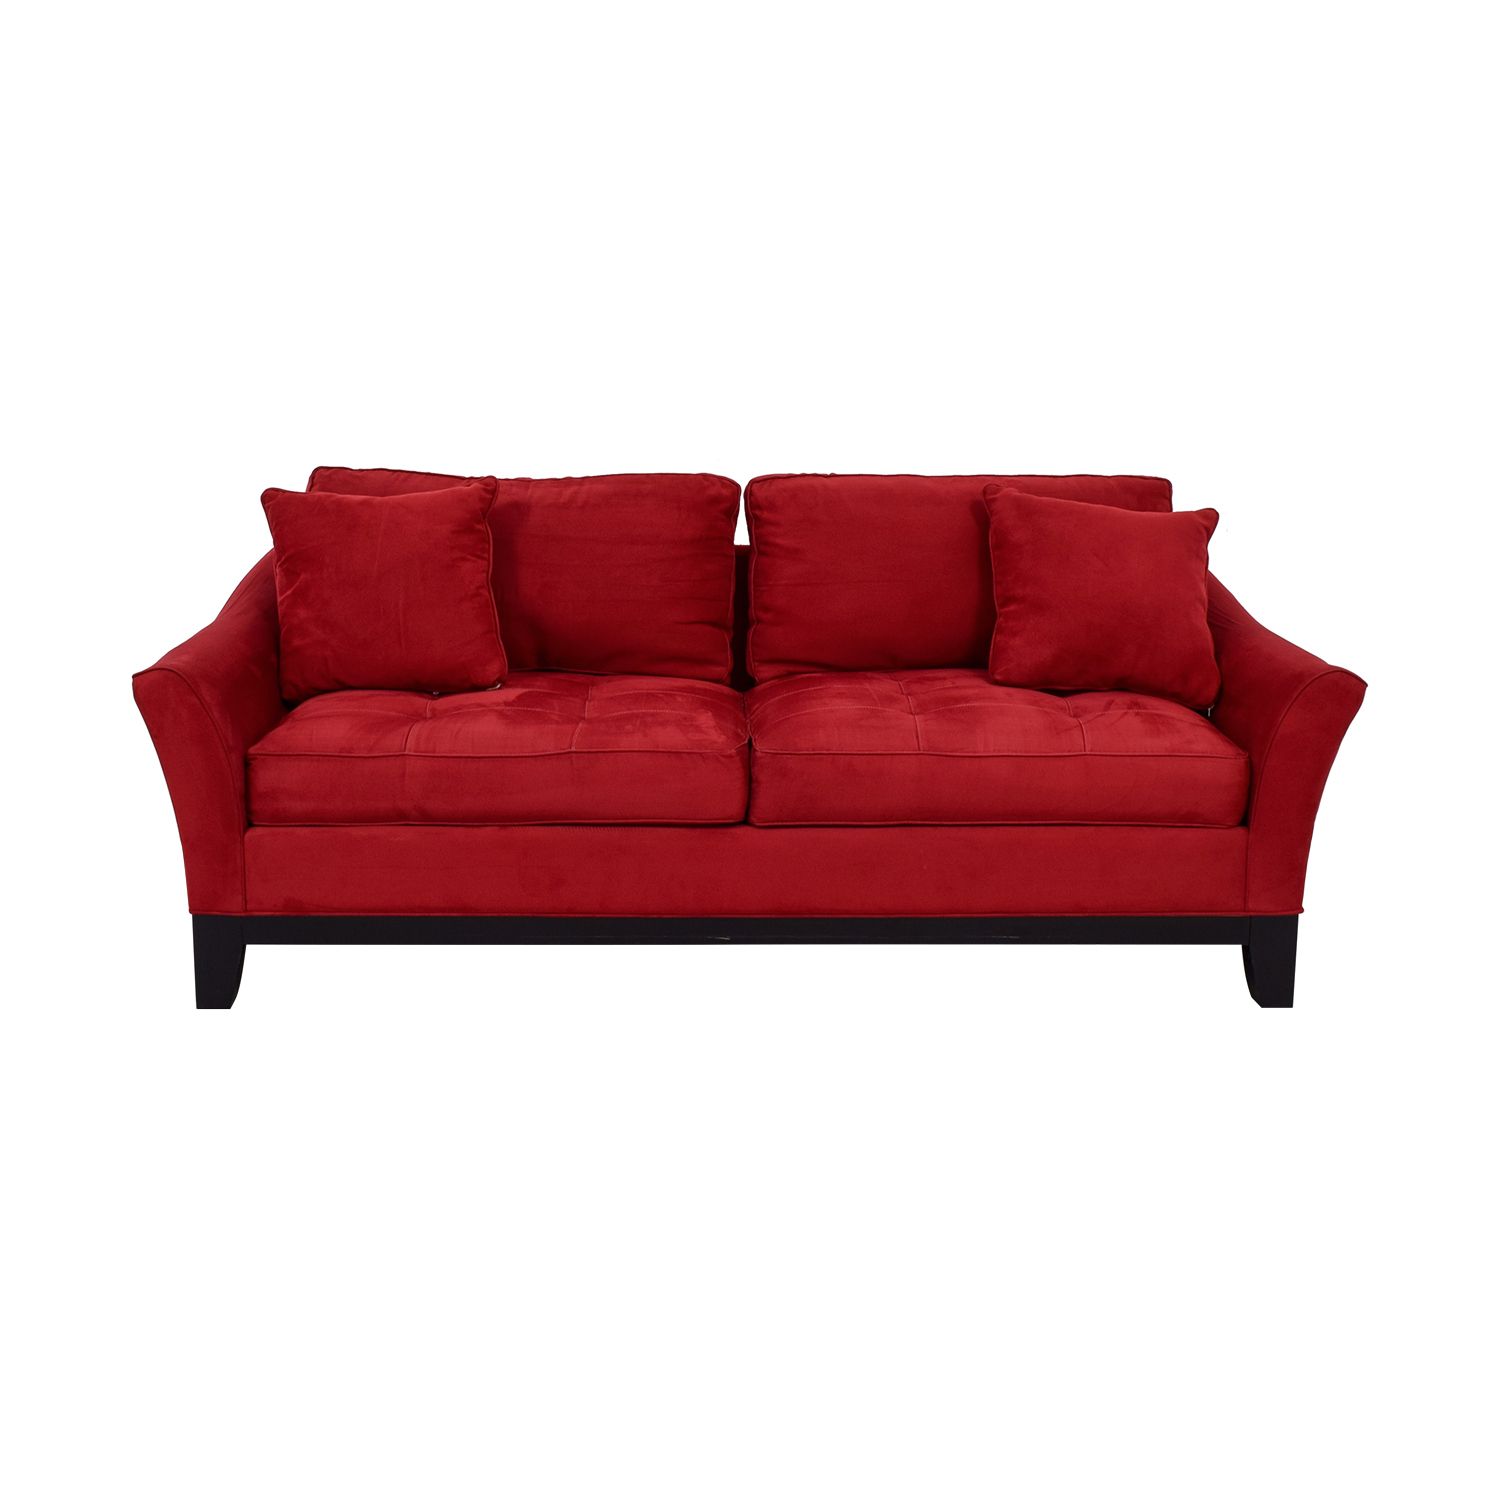 79% Off – Raymour & Flanigan Raymour & Flanigan Rory Red Thufted Within Rory Sofa Chairs (View 9 of 20)